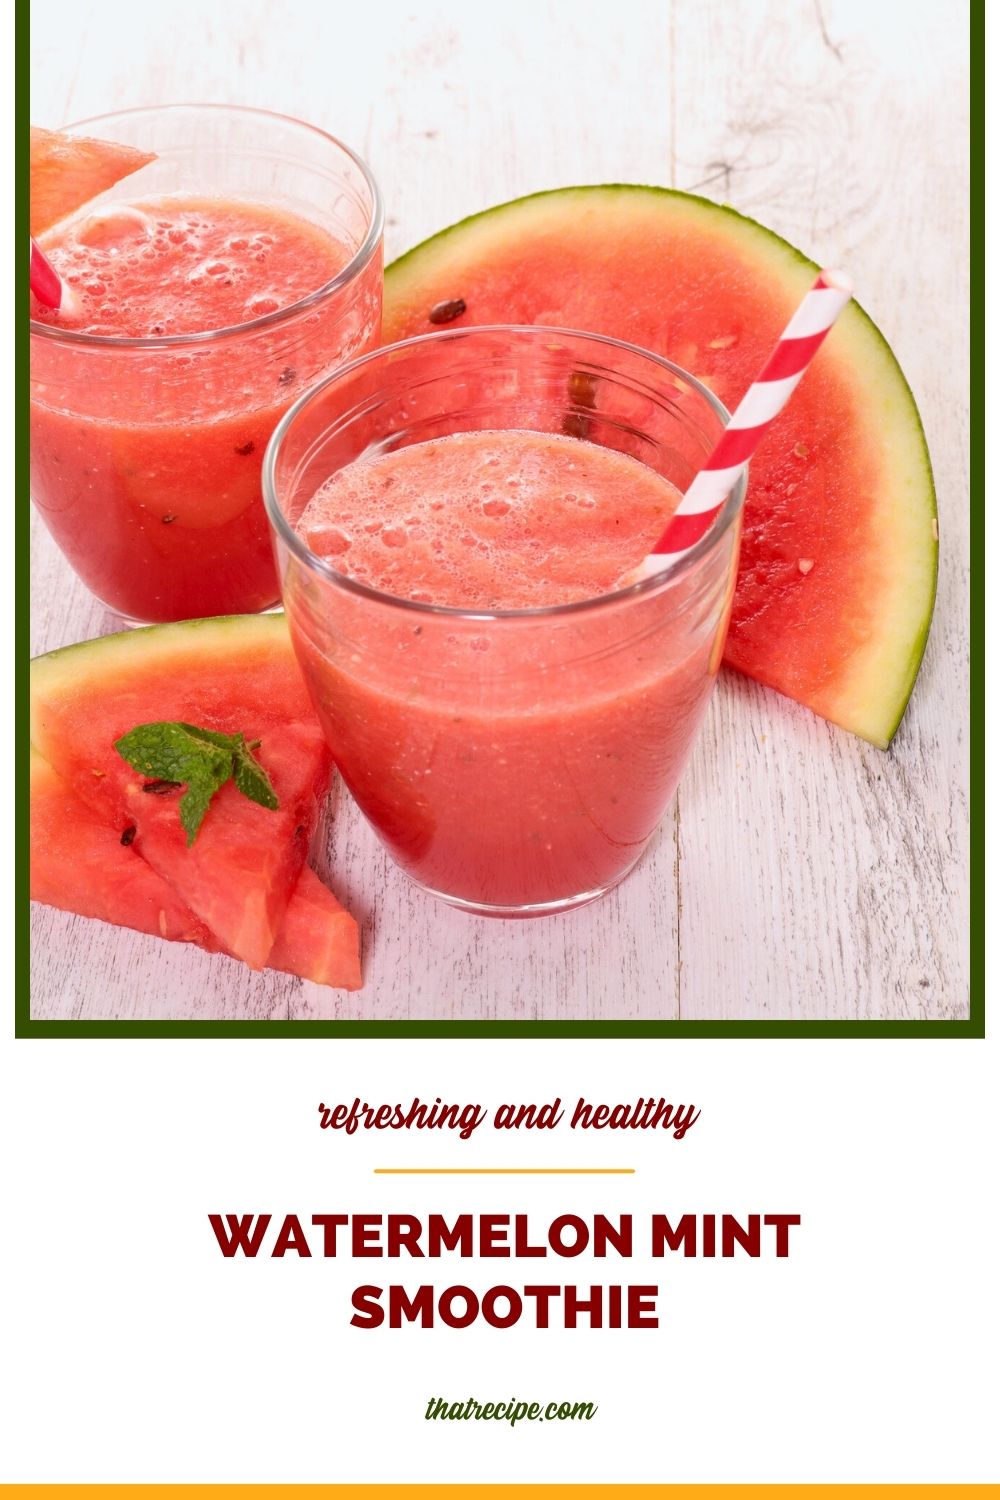 two glasses of watermelon smoothies with watermelon slices with text overlay "watermelon mint smoothie"